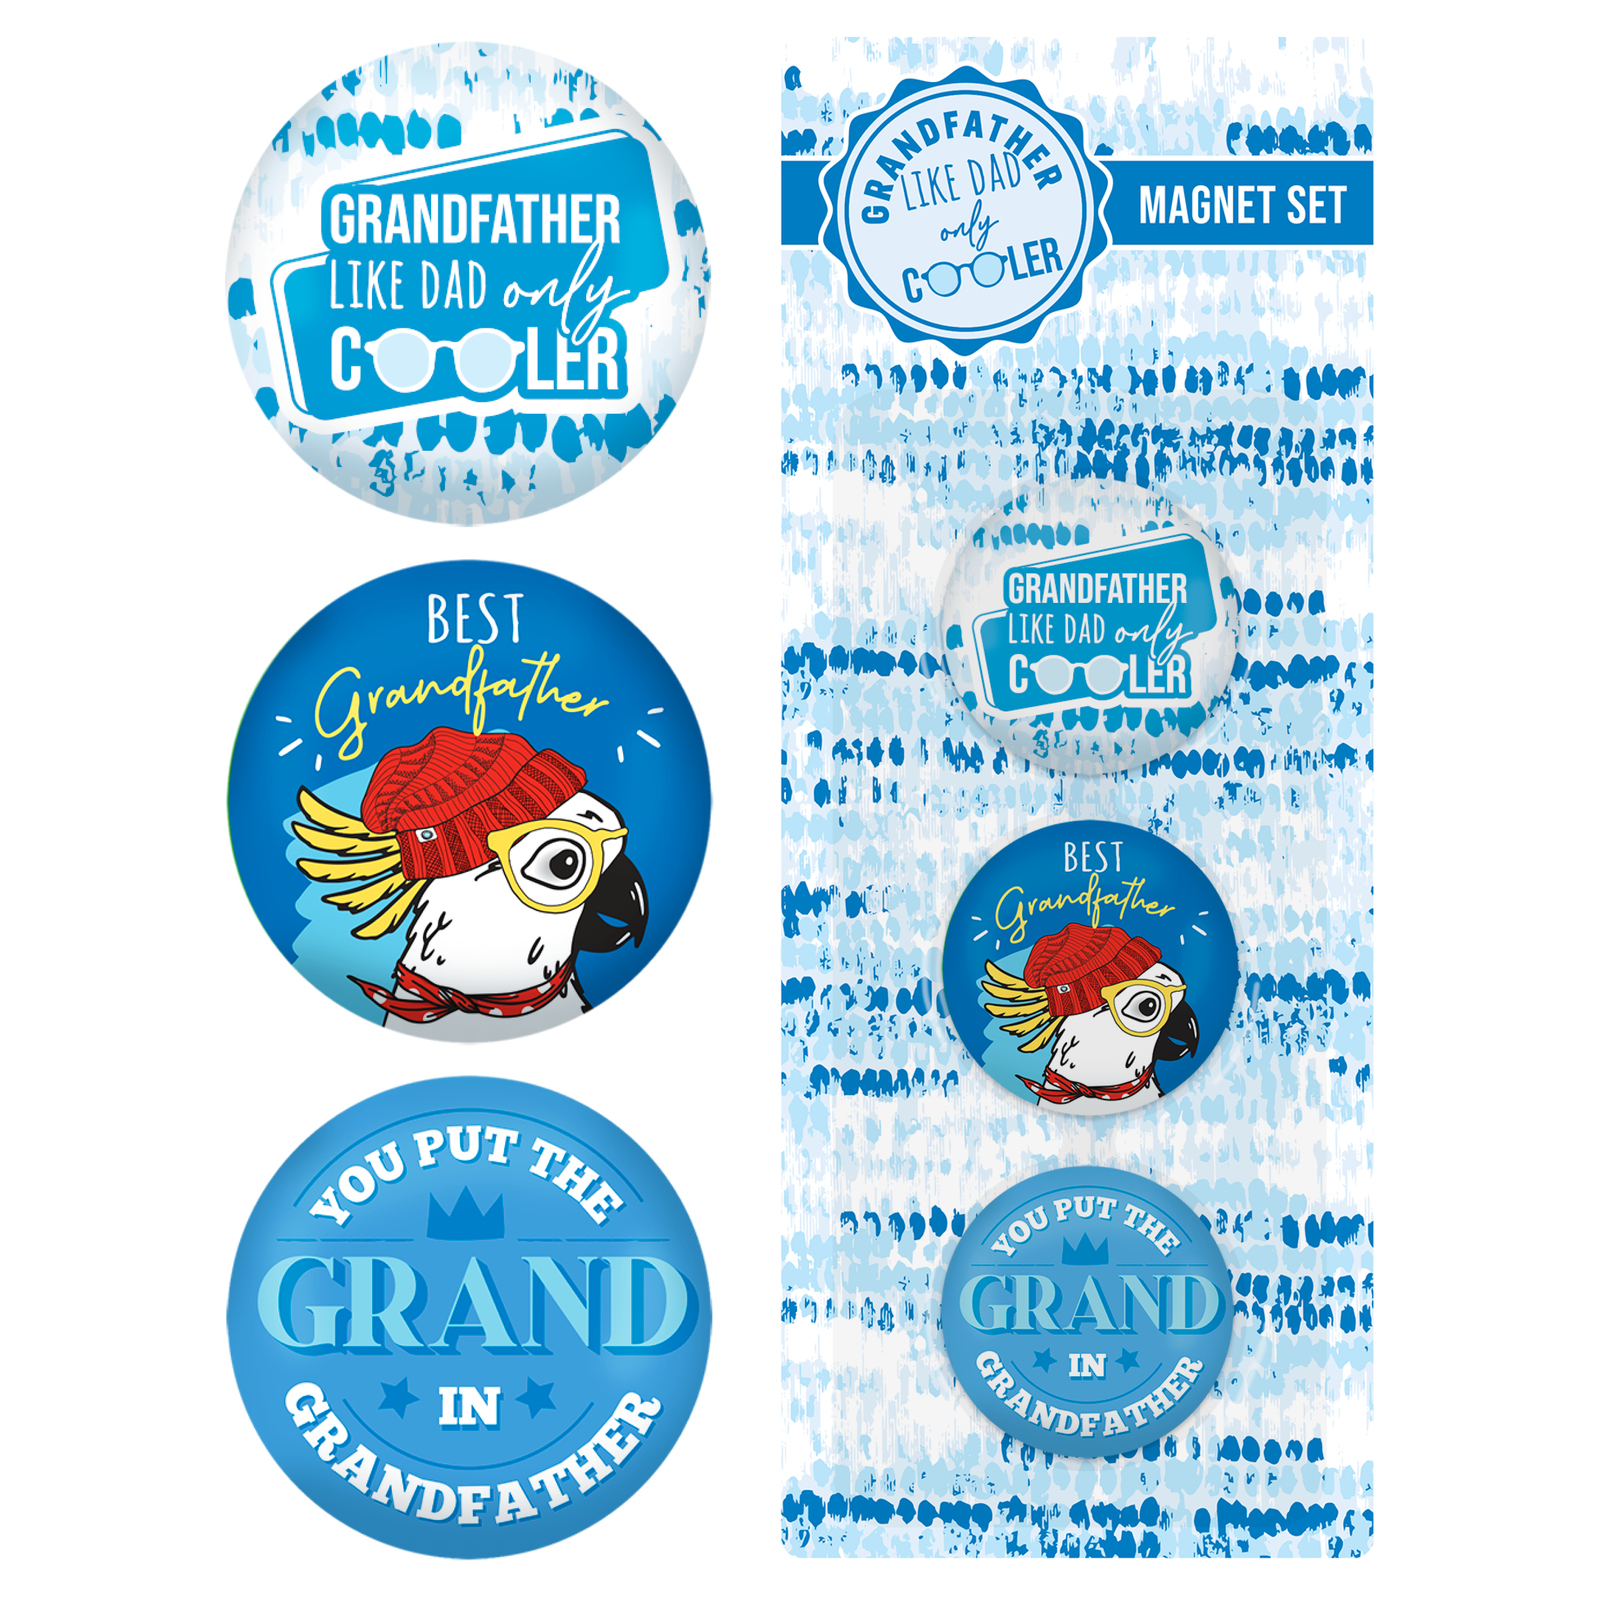 Grandfather Magnet Set of 3